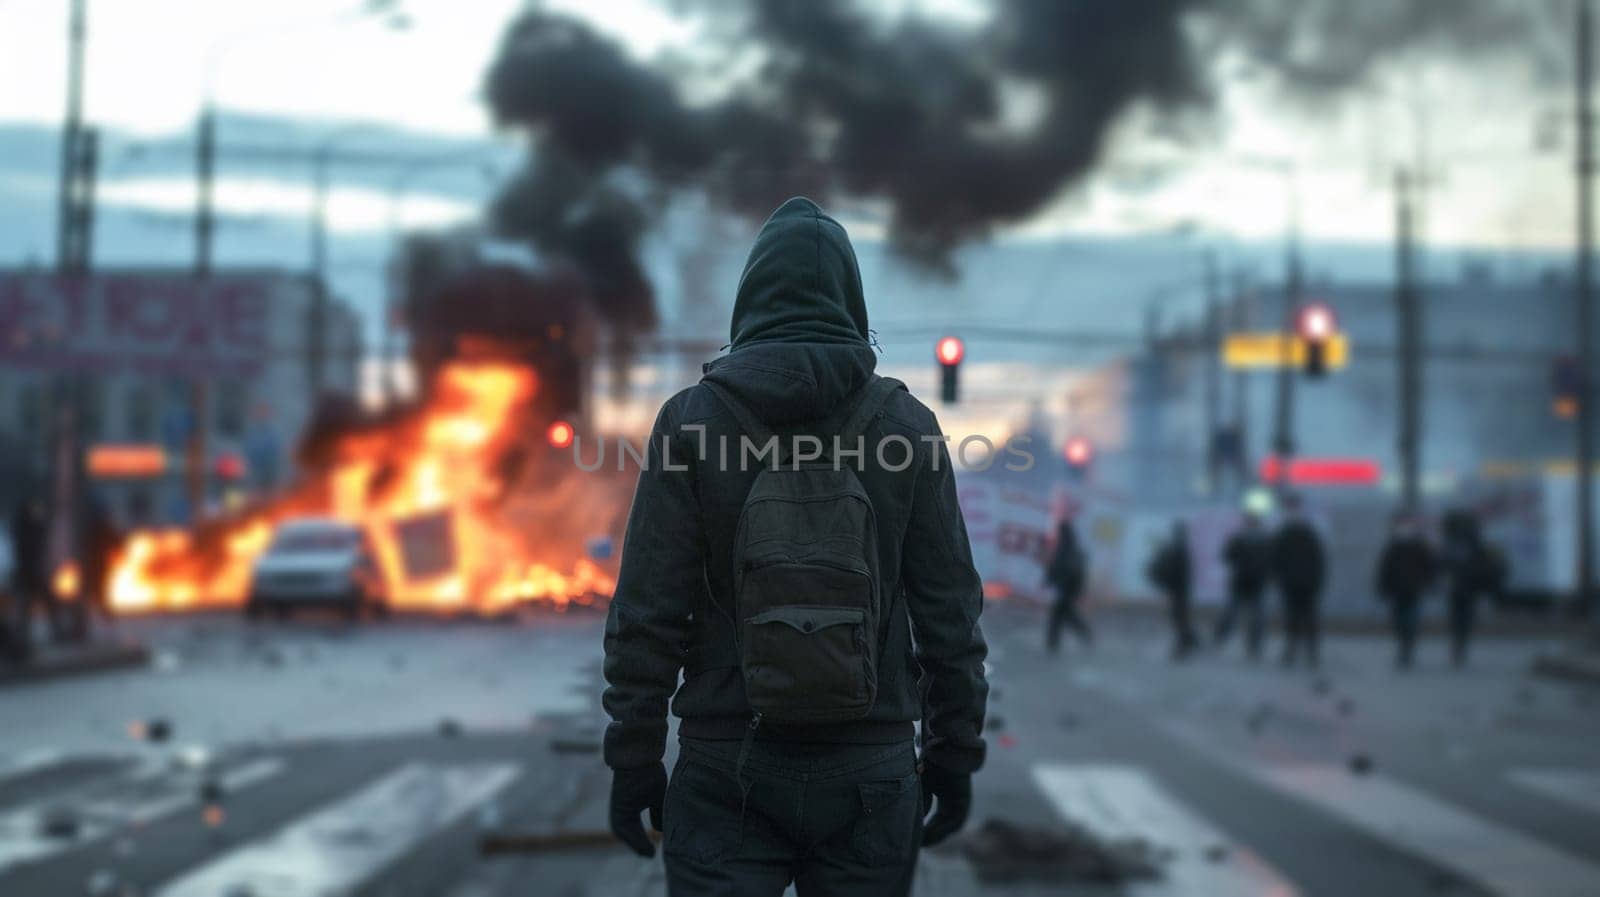 Lone observer stands before fiery street protest, capturing unrest, conflict, and turmoil in urban setting